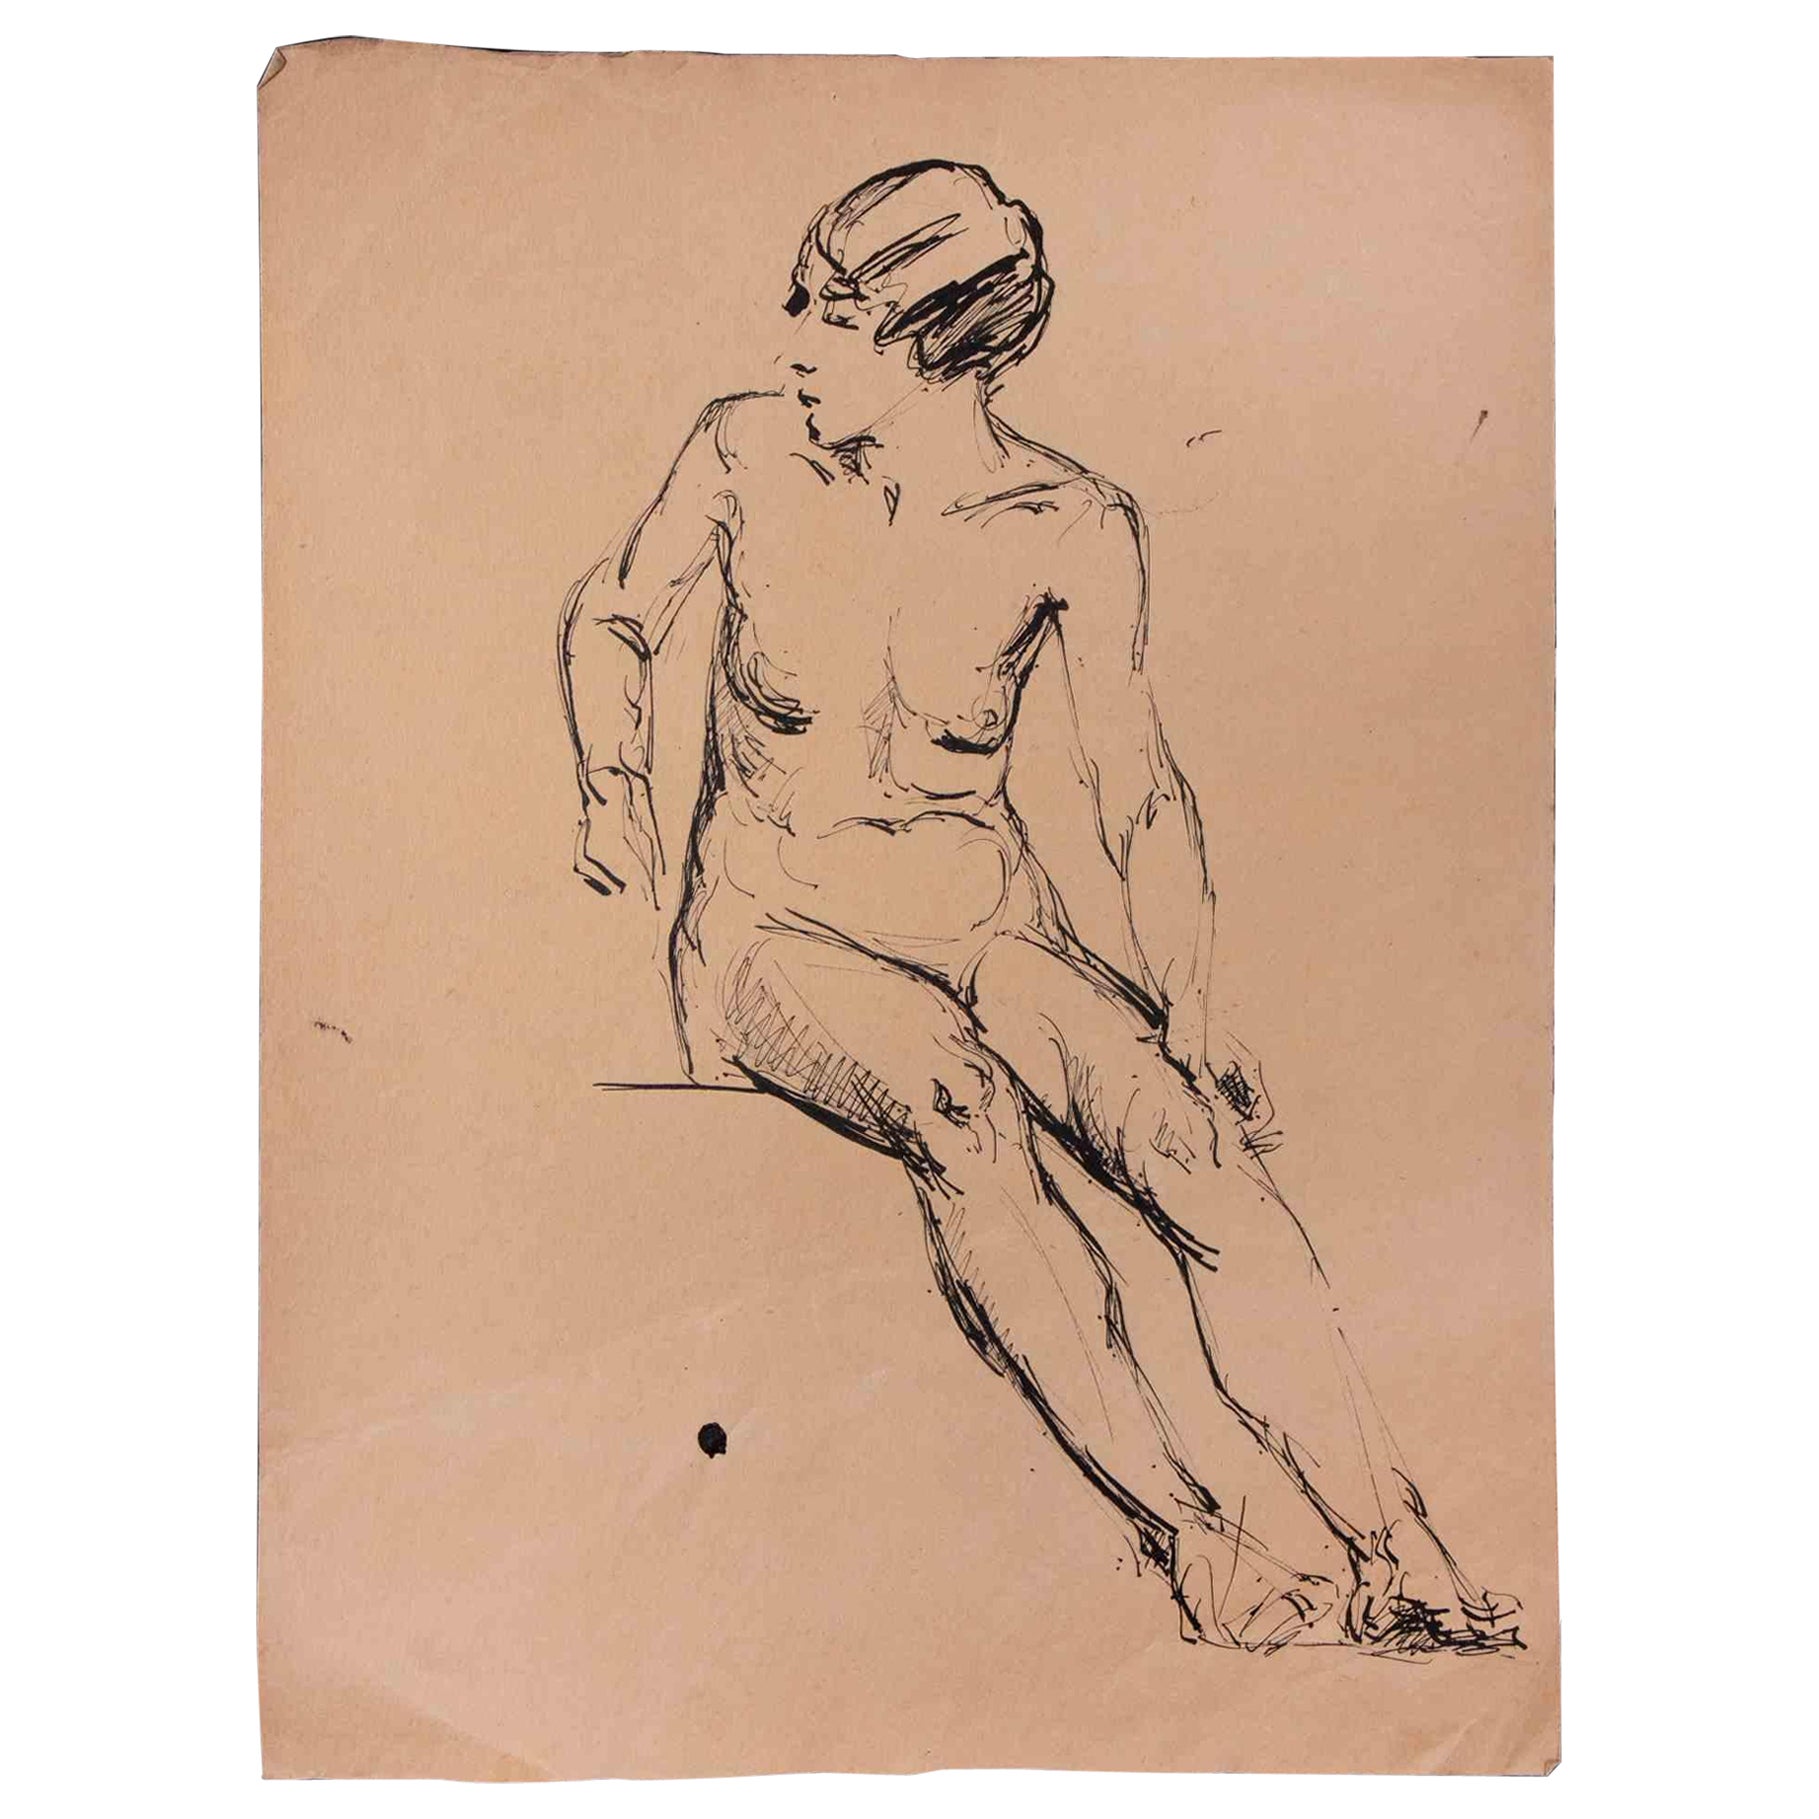 Nude of Woman - Original Drawing attr. to Paul Grain - Mid 20th Century - Art by Paul Garin